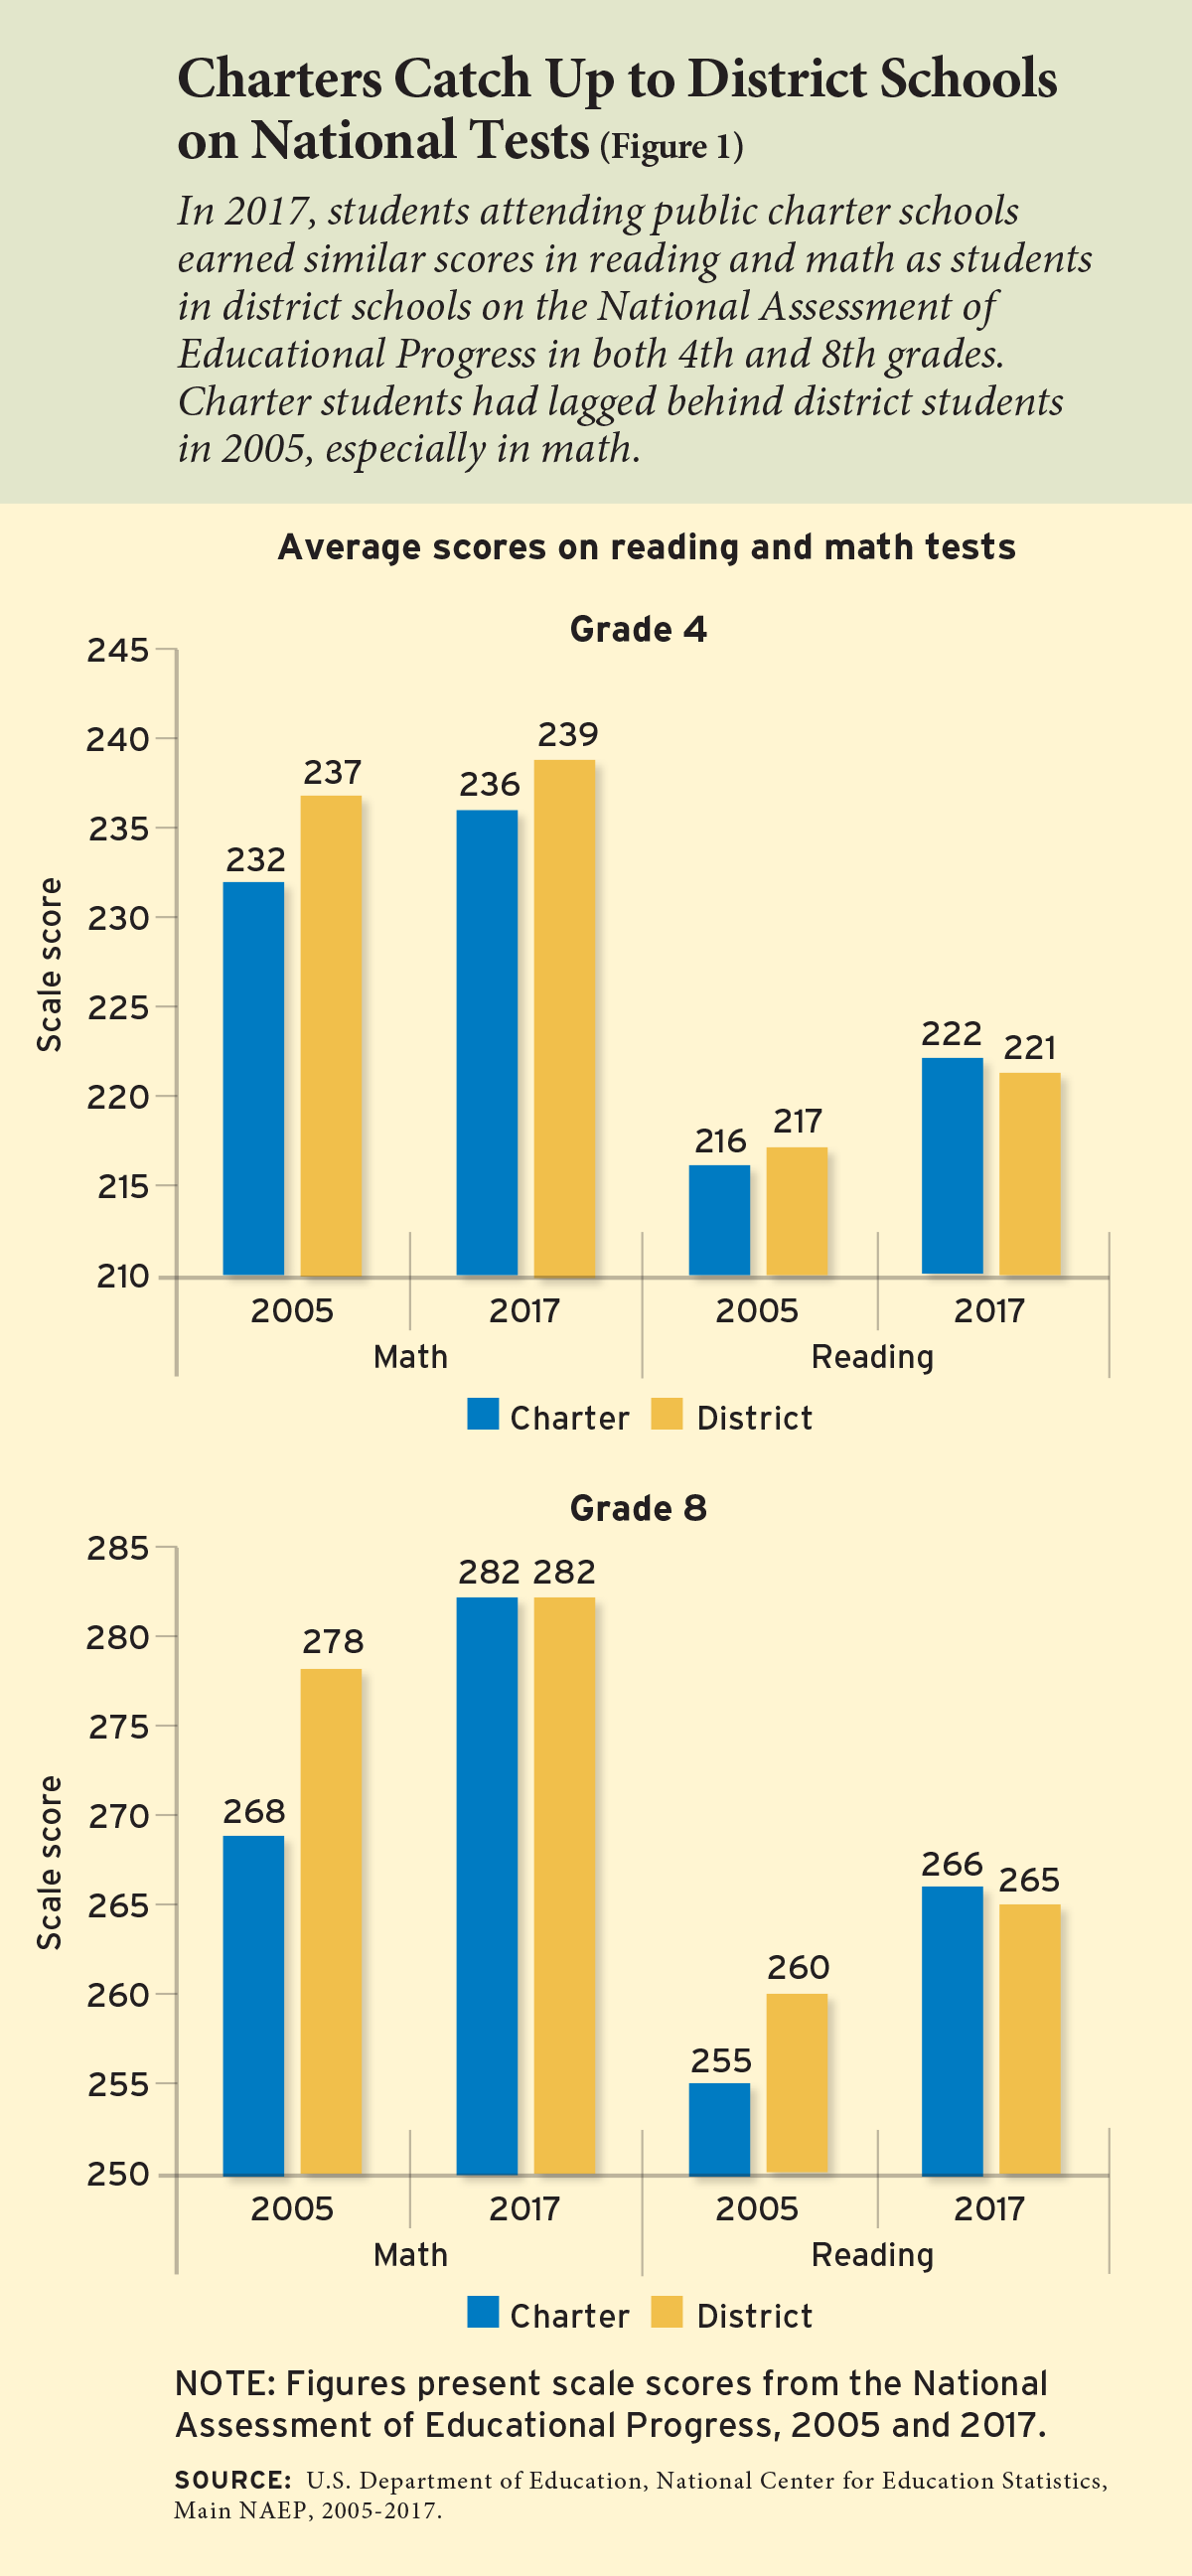 Figure 1 - Charters Catch Up to District Schools on National Tests